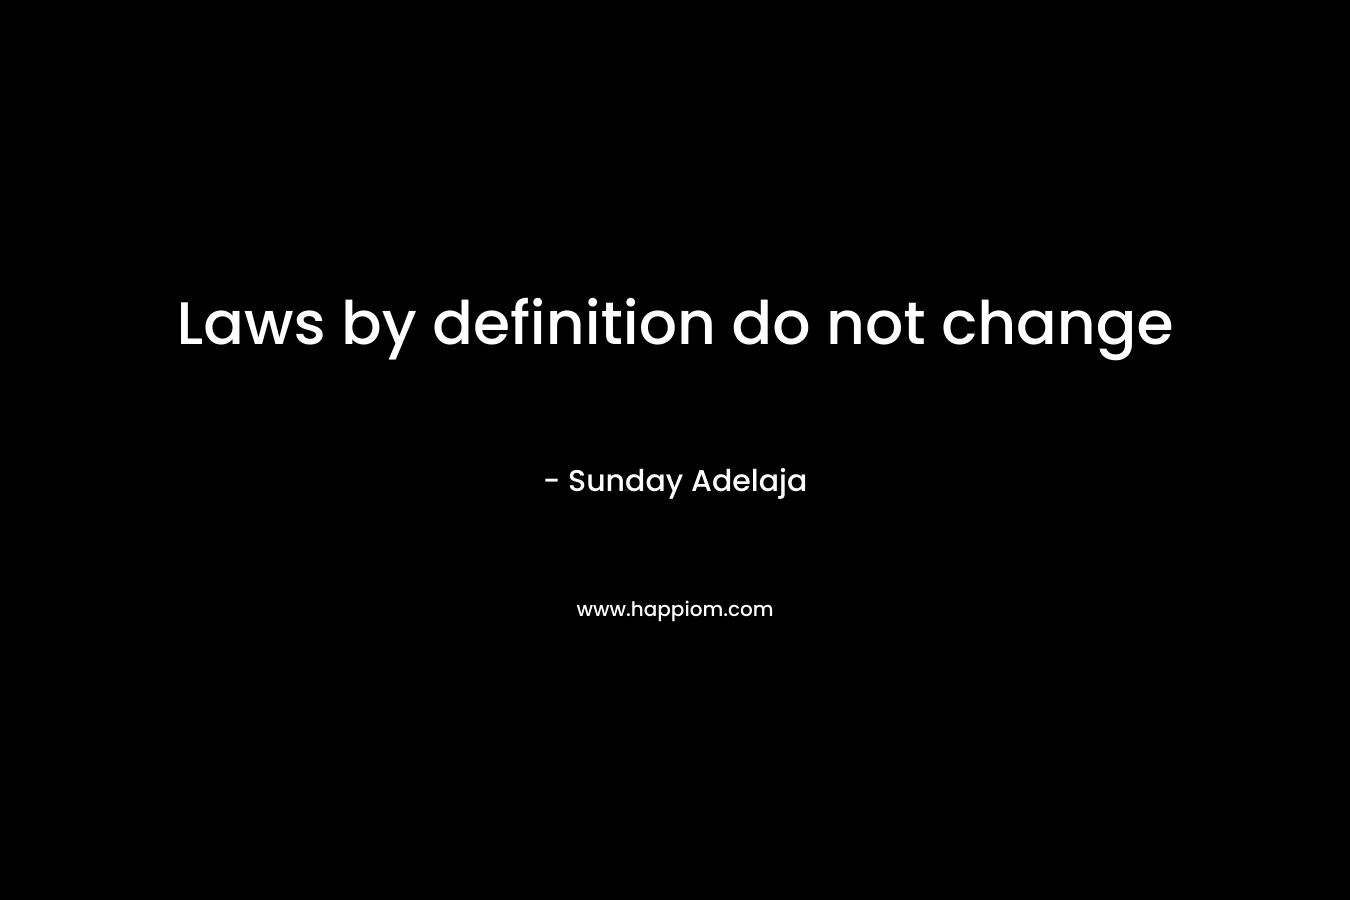 Laws by definition do not change